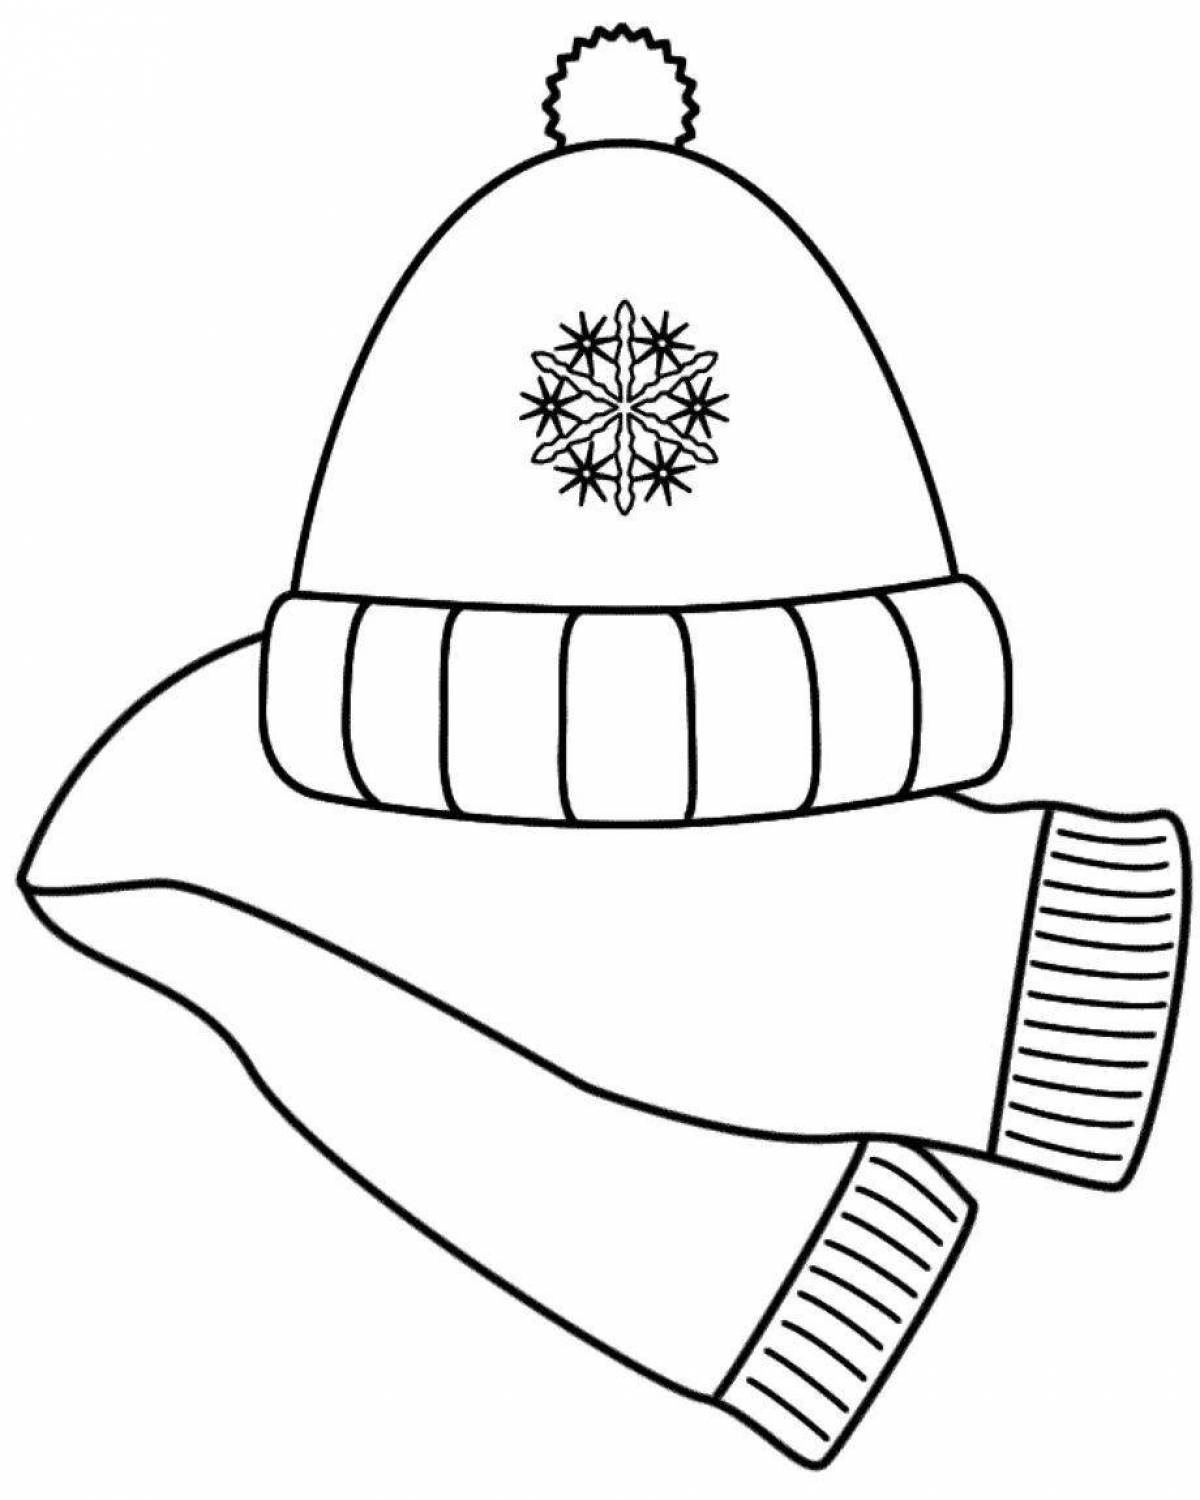 Adorable mittens and hat coloring book for kids